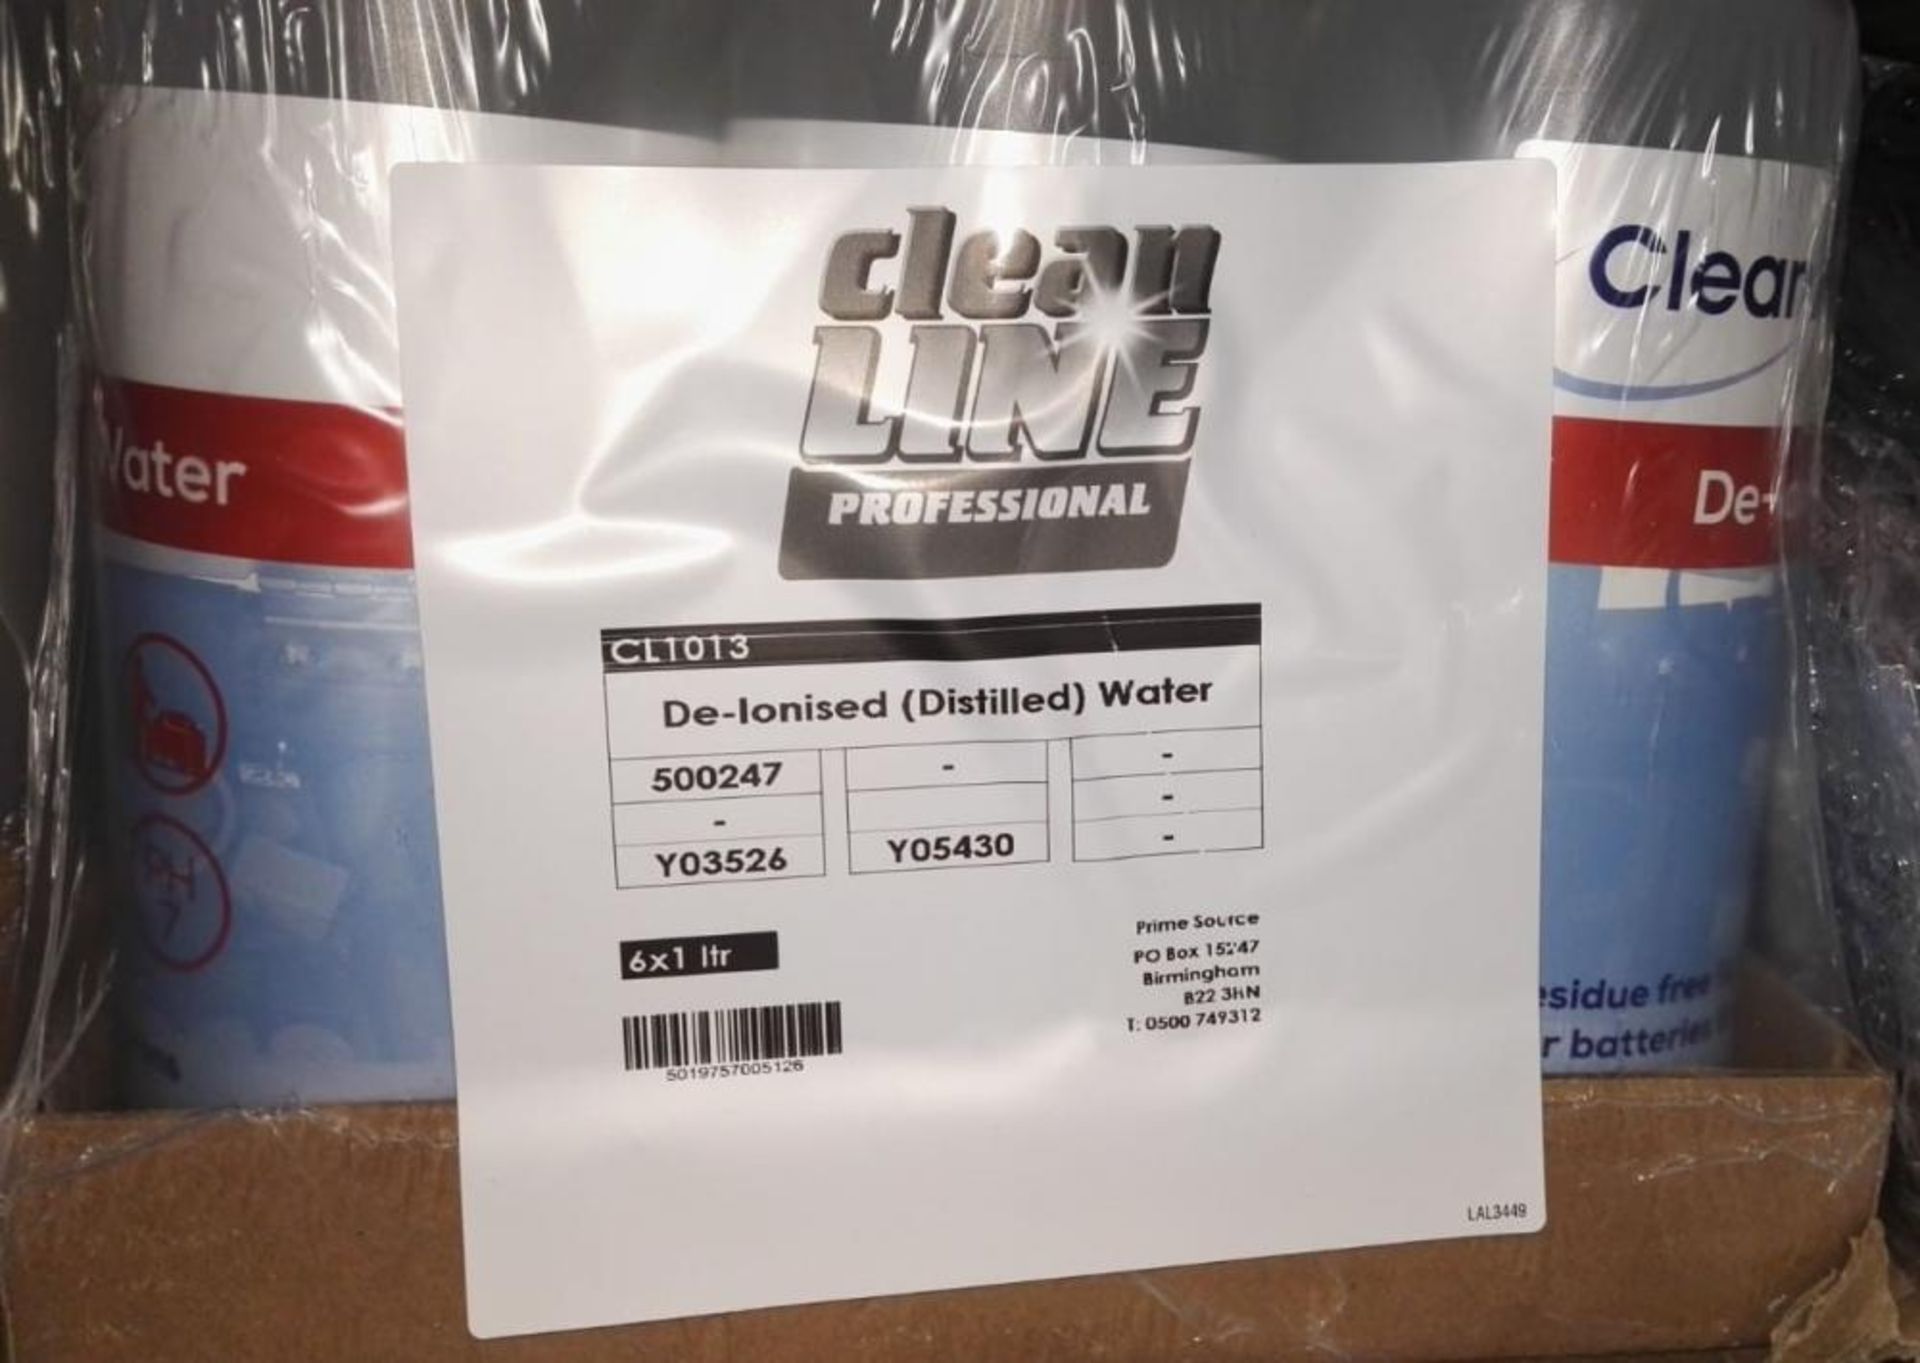 Pallet Job Lot Of Clean Line Professional De-Ionised (Distilled) Water - Ref: Ma368 - Contains Appro - Image 2 of 2